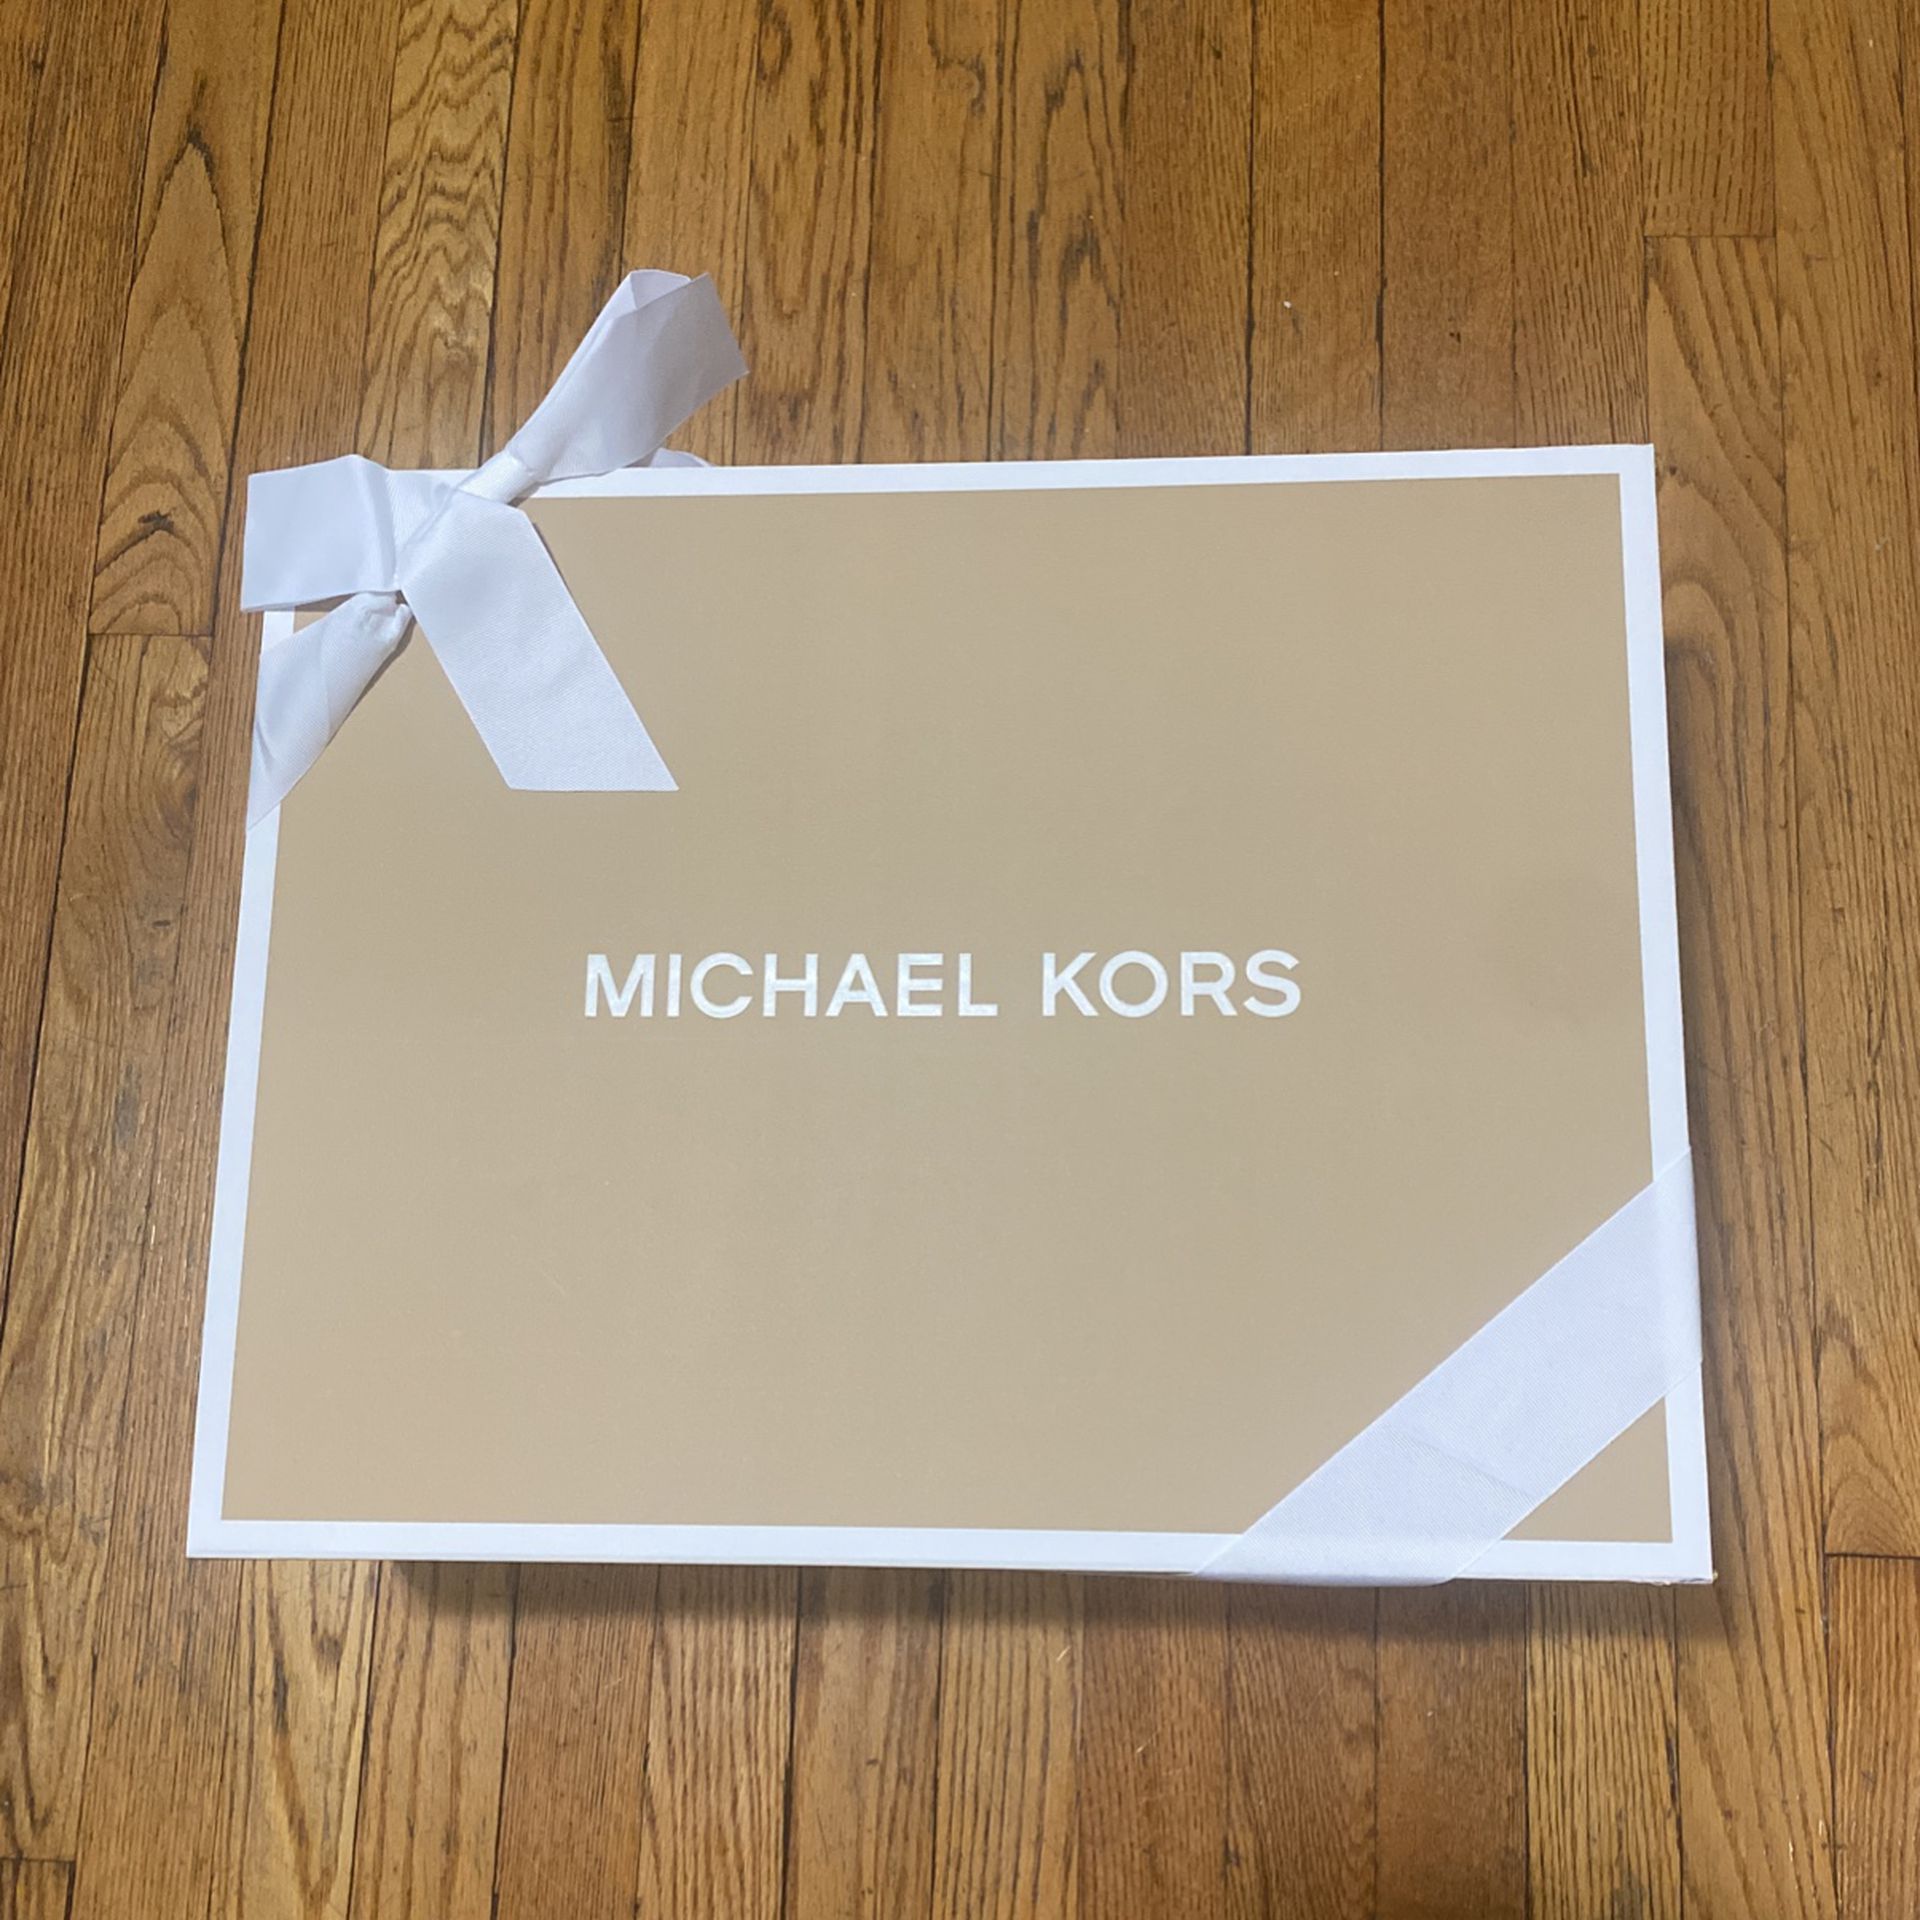 Michael Kors Gift Box With Bow for Sale in Queens, NY - OfferUp